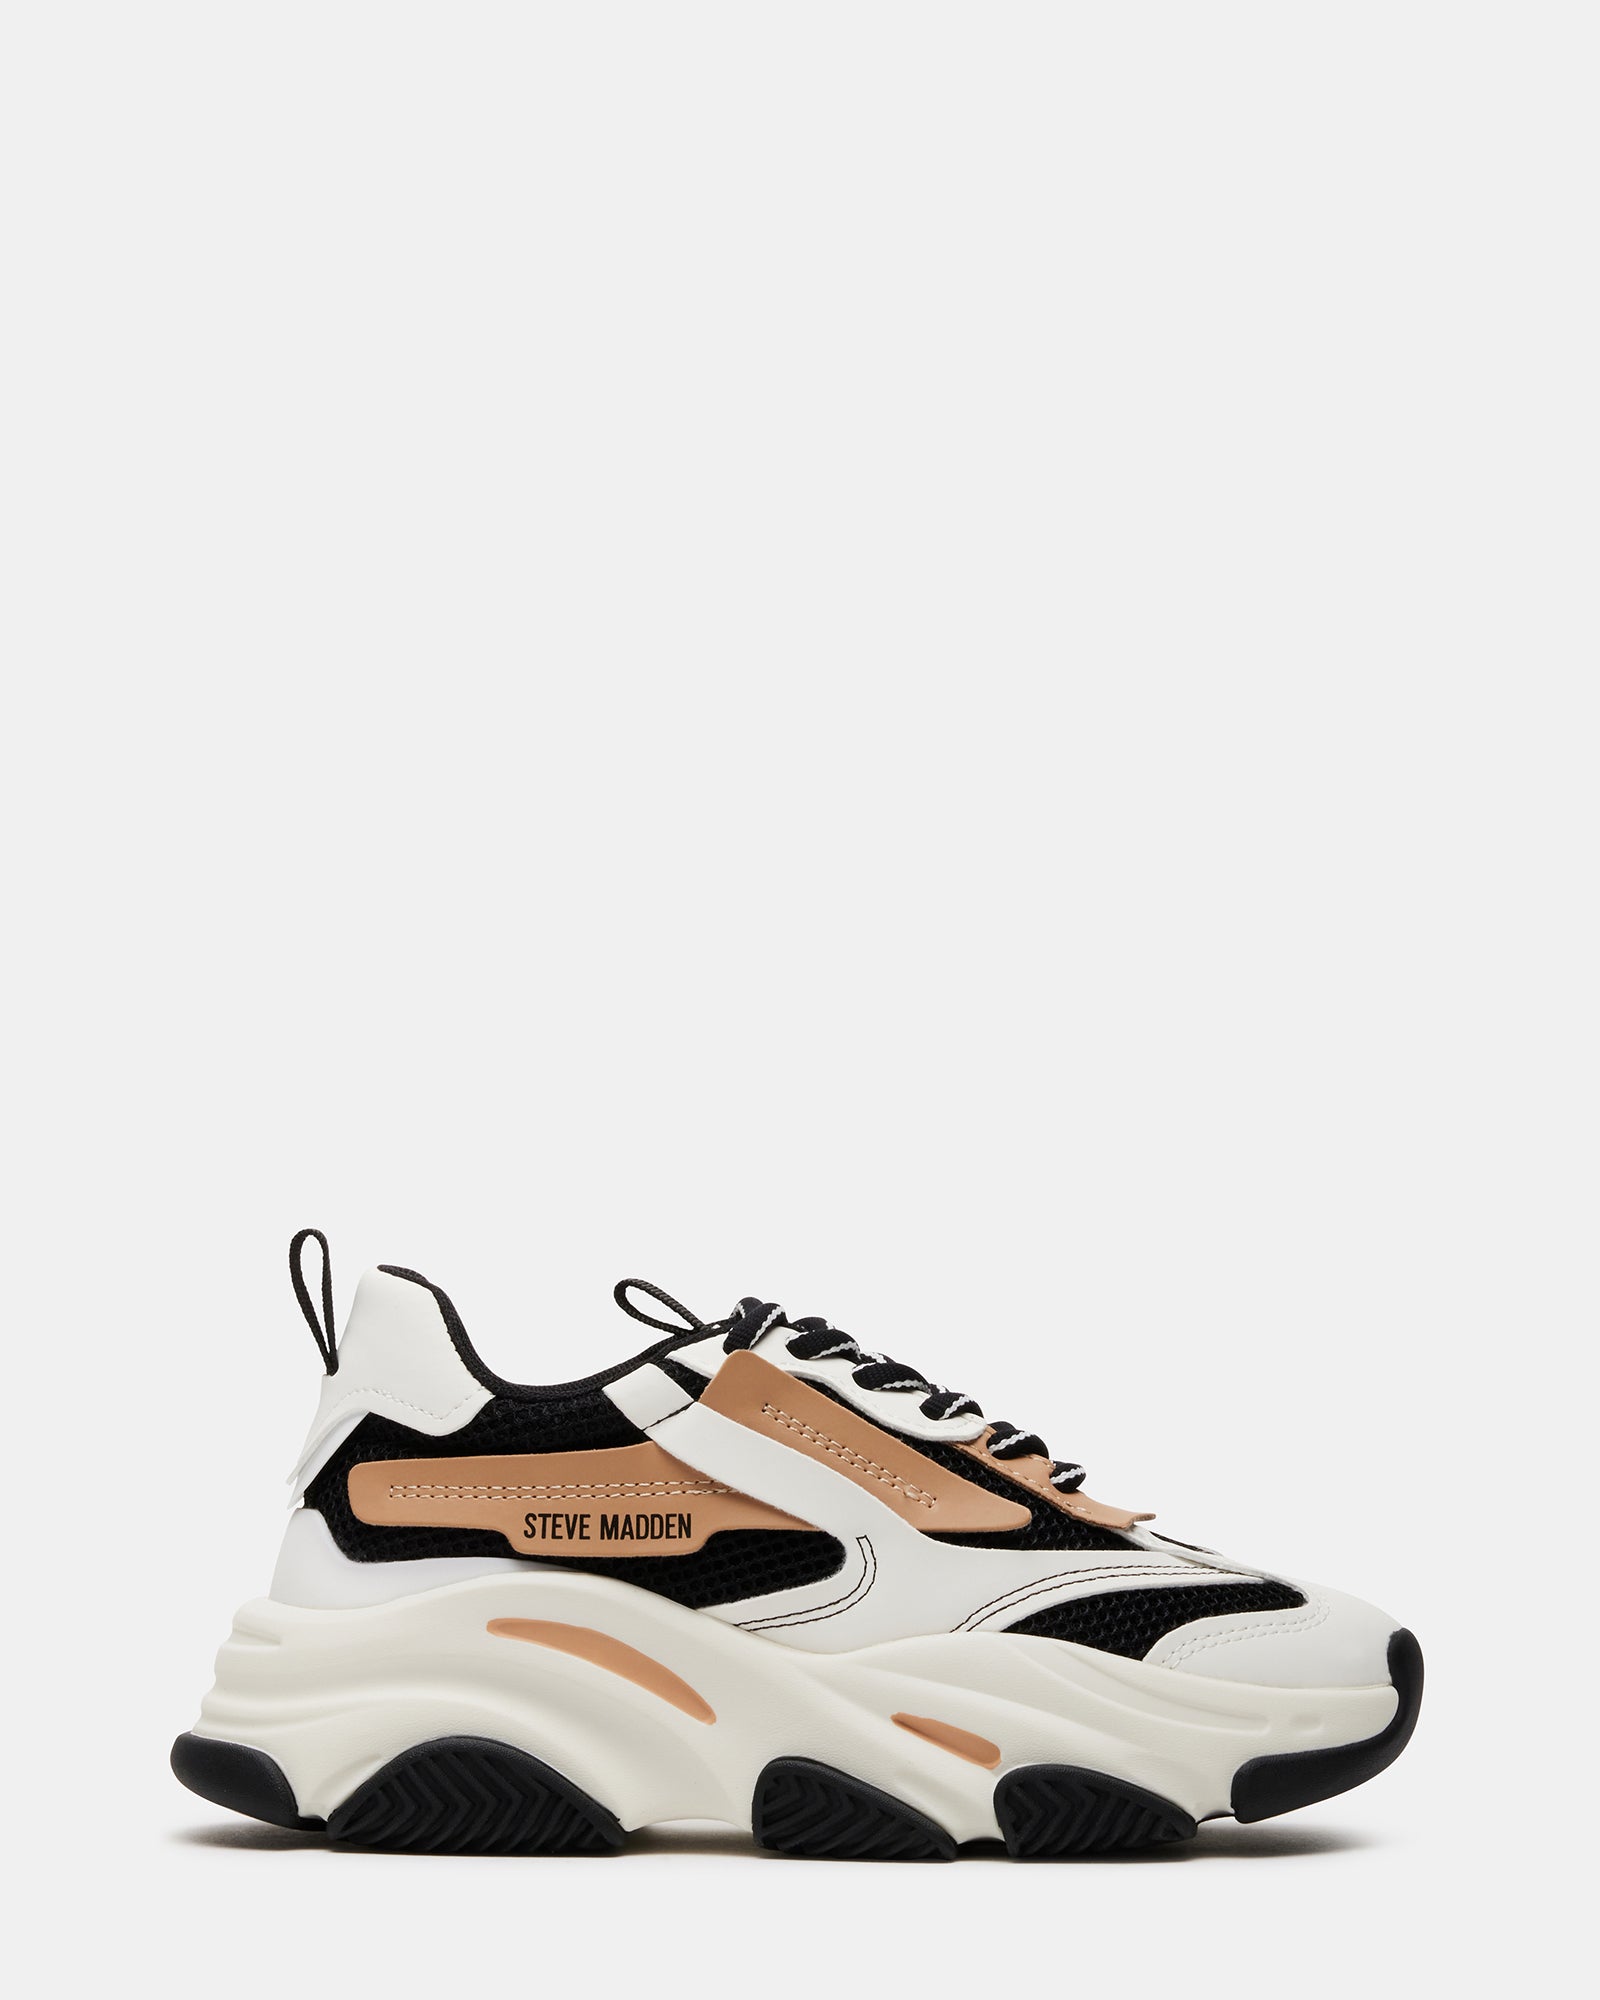 steve madden sneakers with matching bag｜TikTok Search